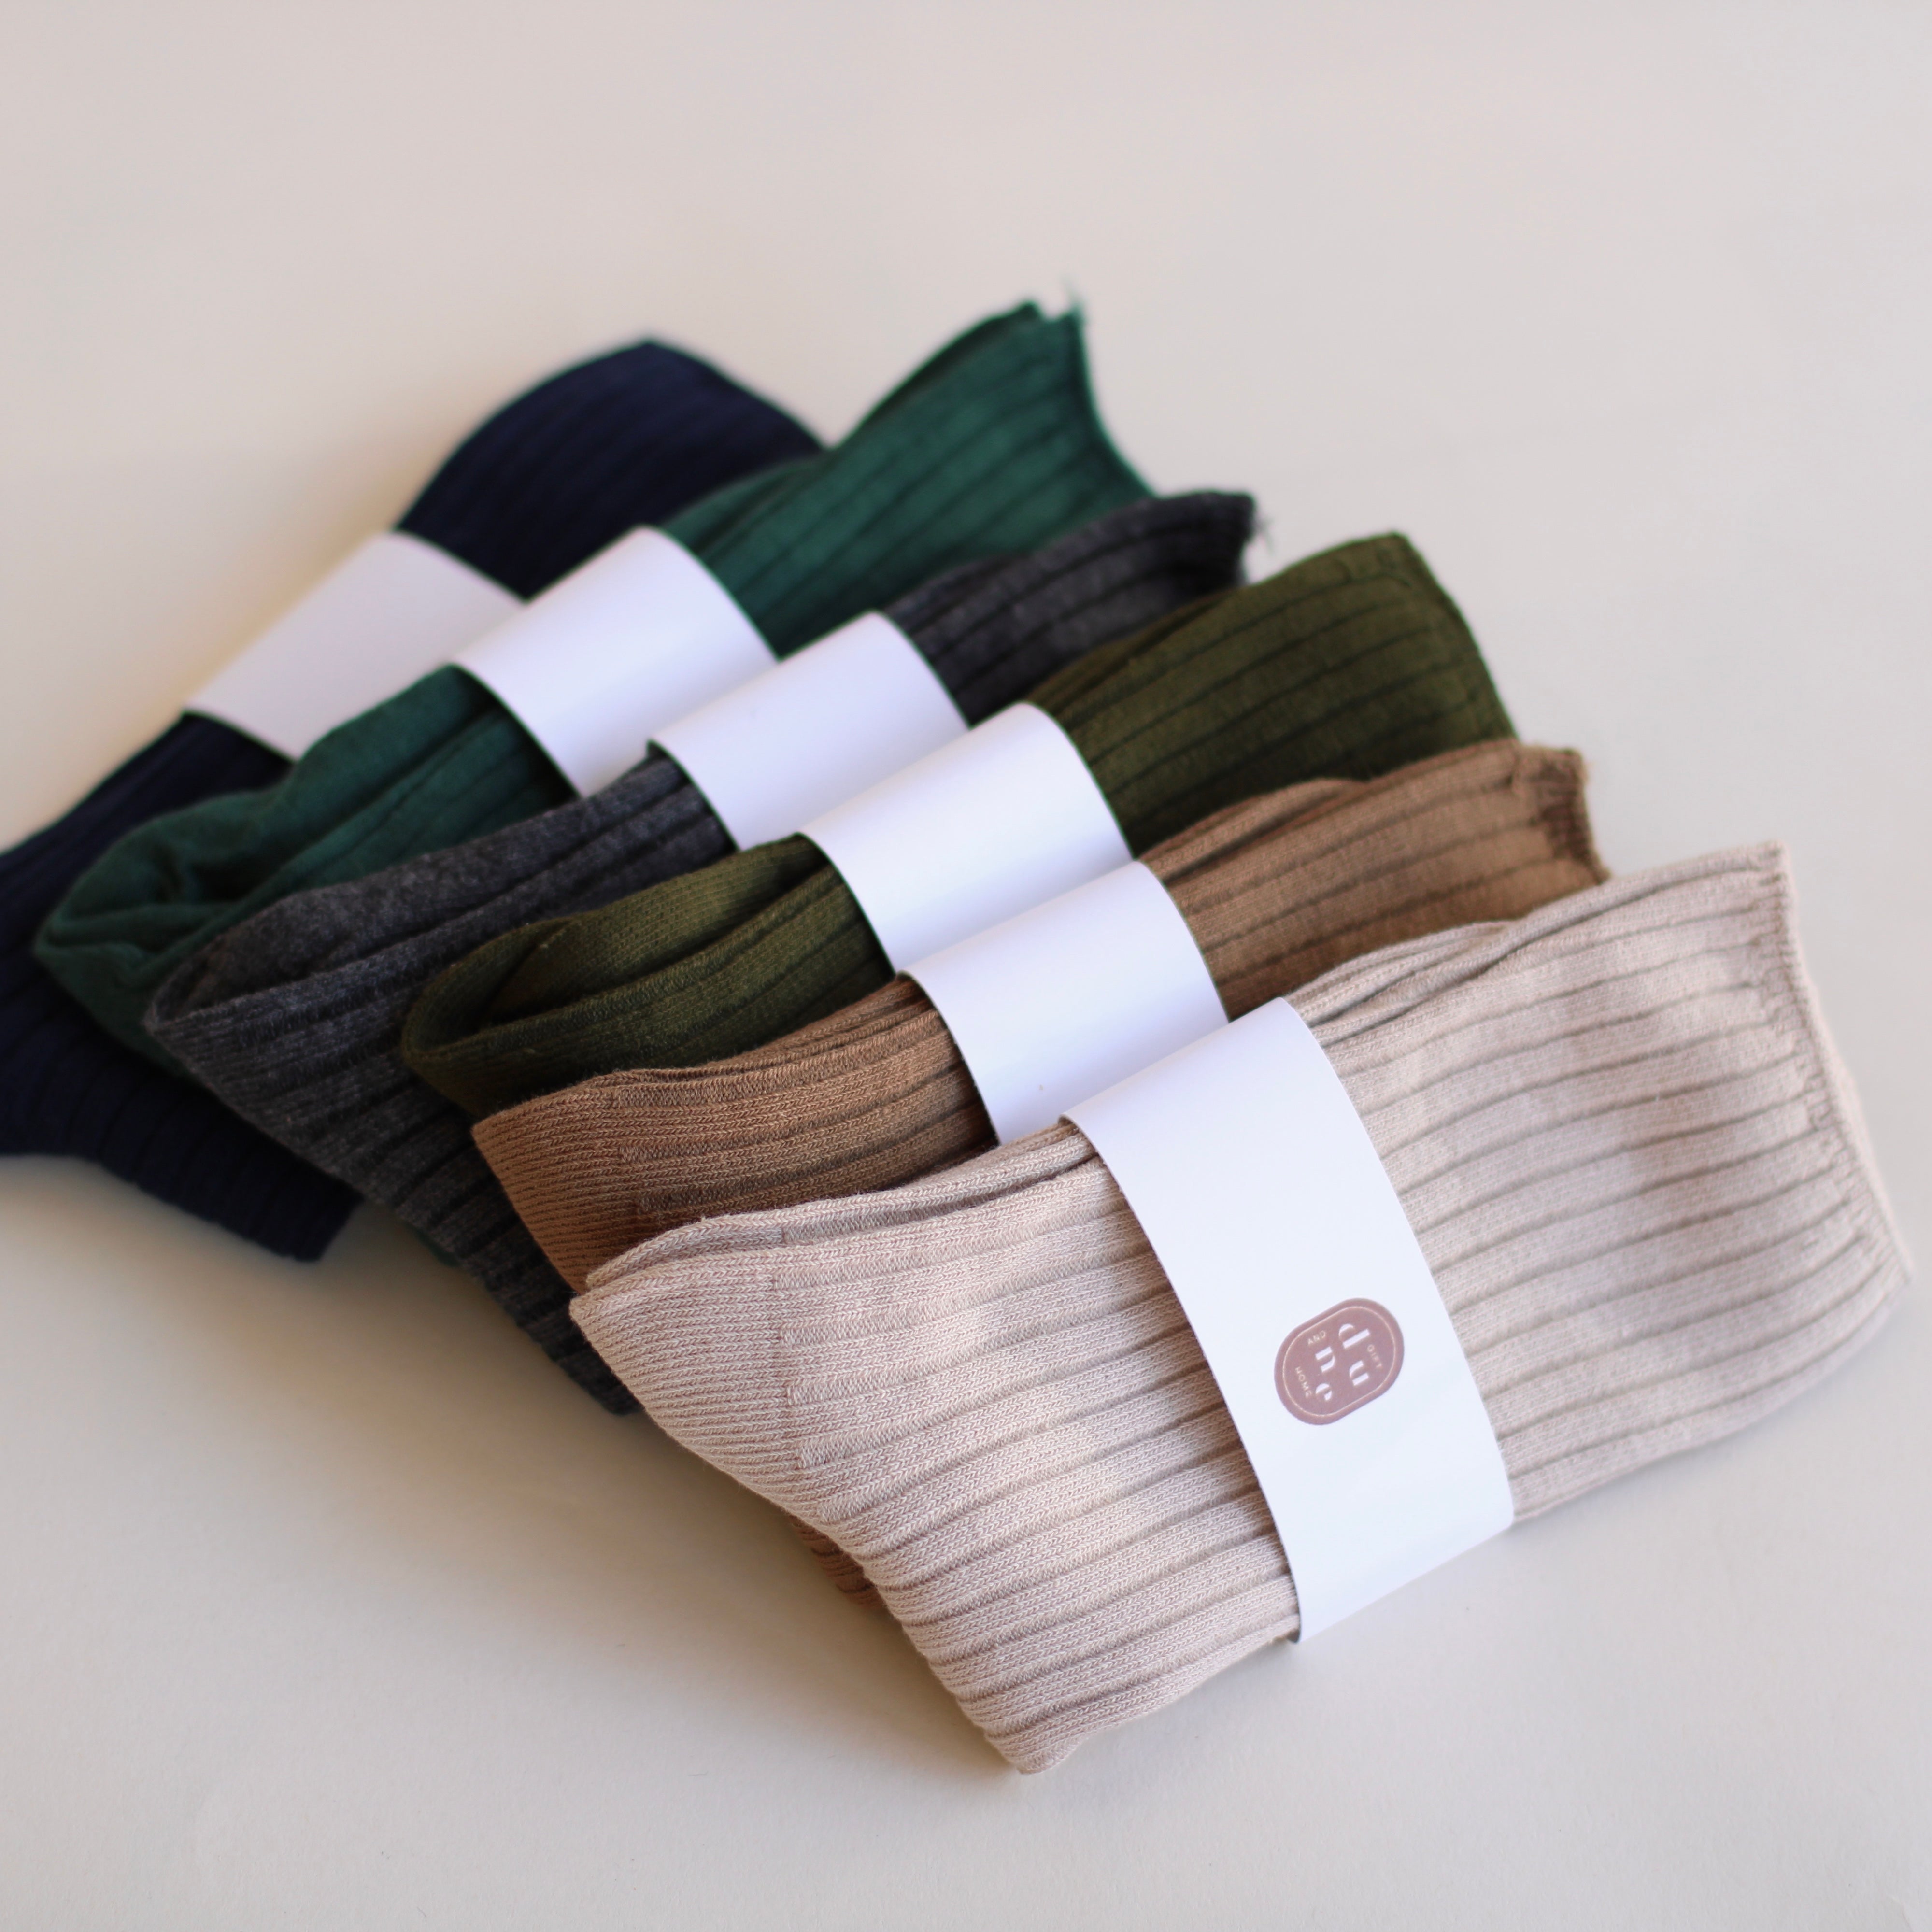 Classic Ribbed Trouser Socks, choose your color